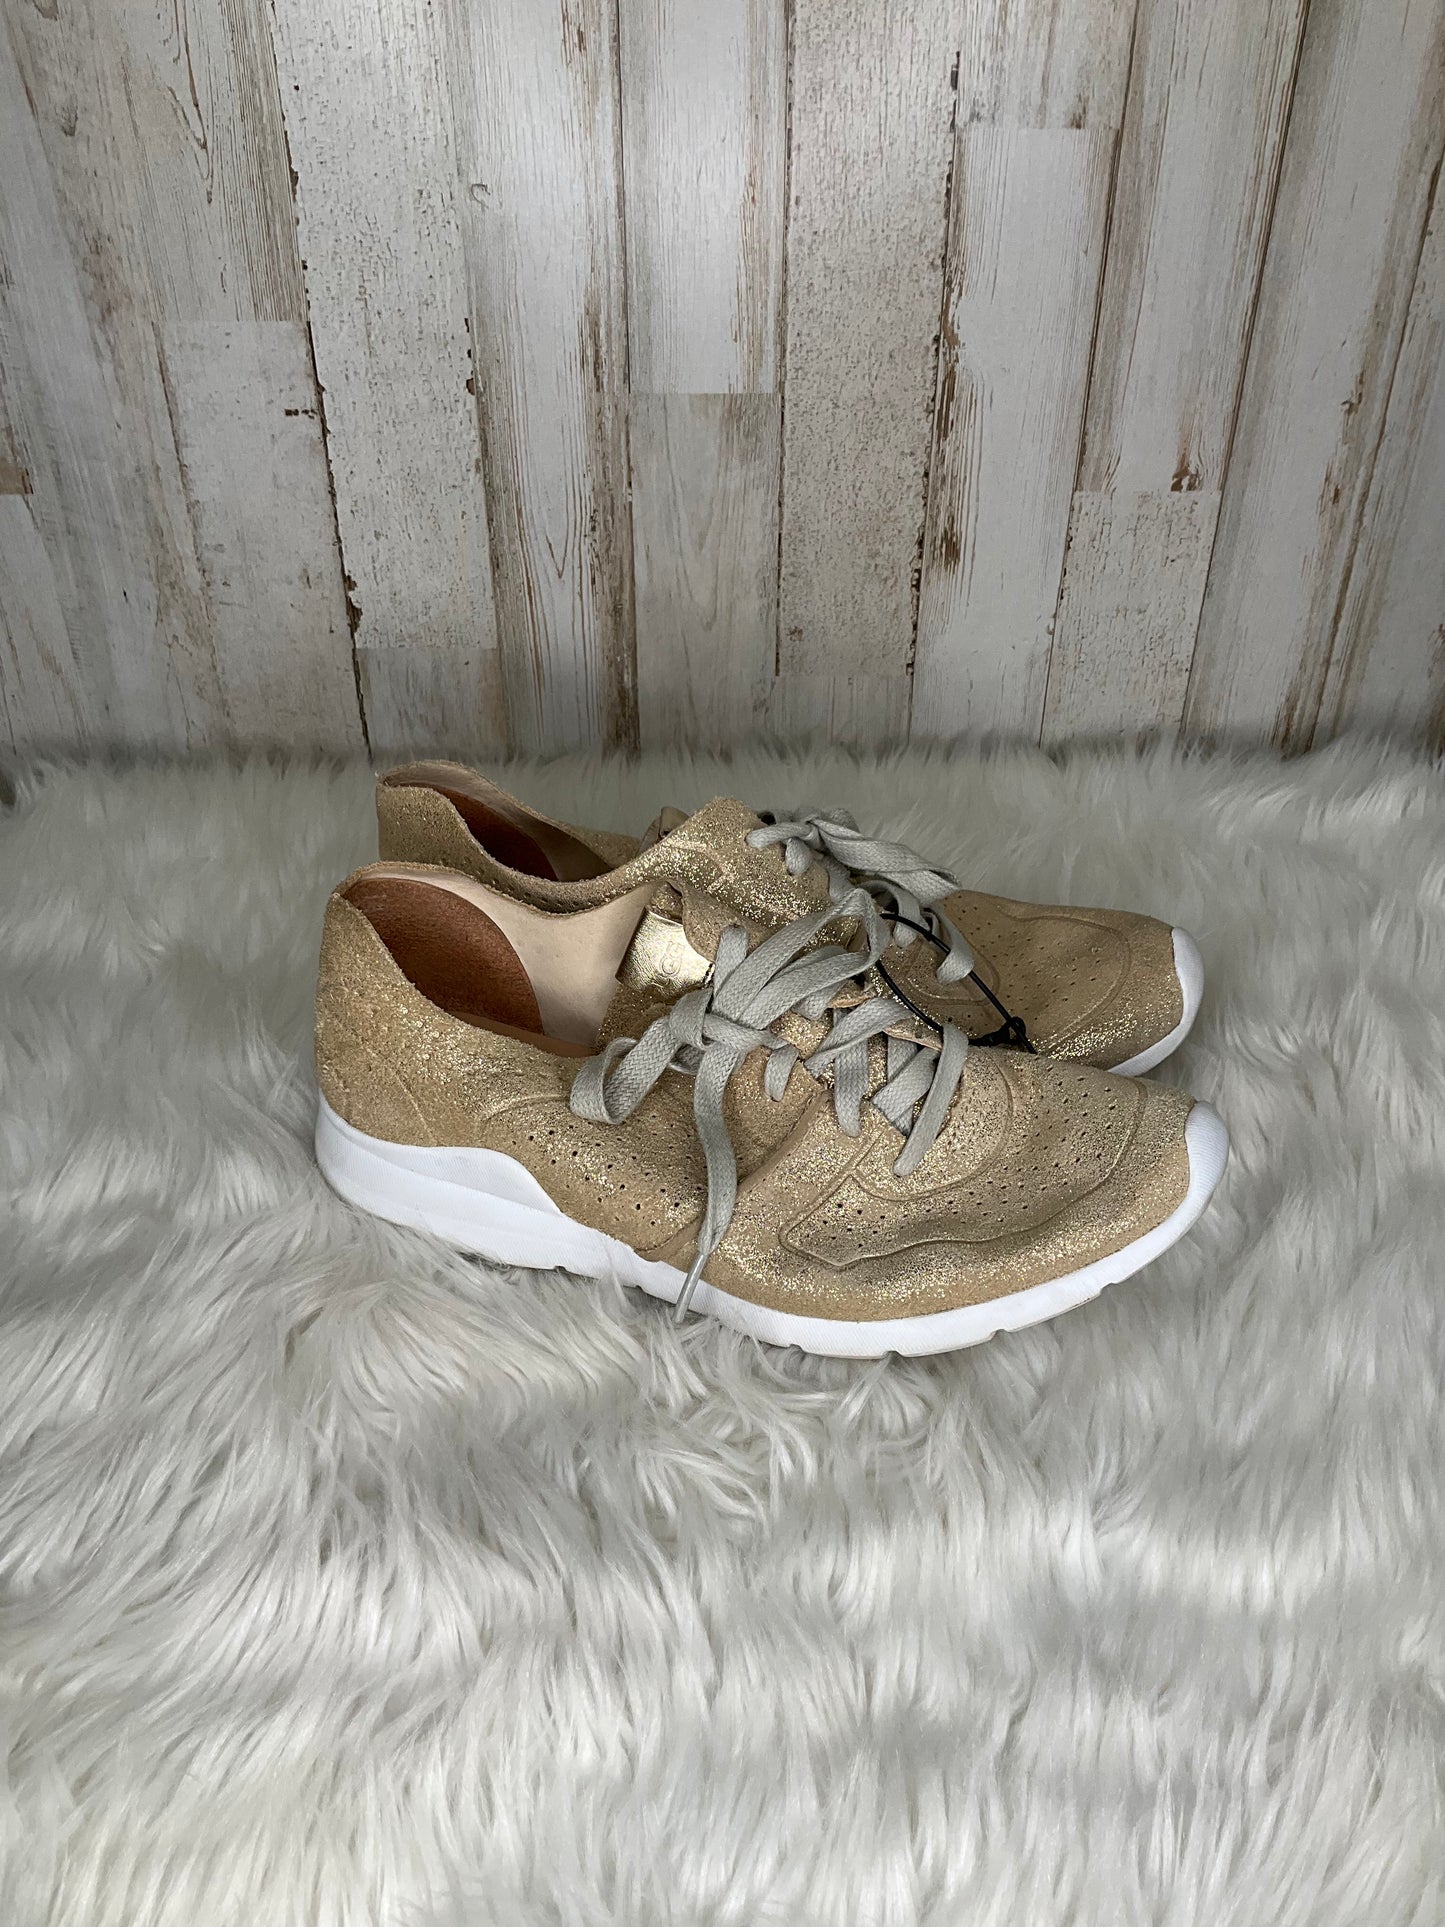 Gold Shoes Athletic Ugg, Size 8